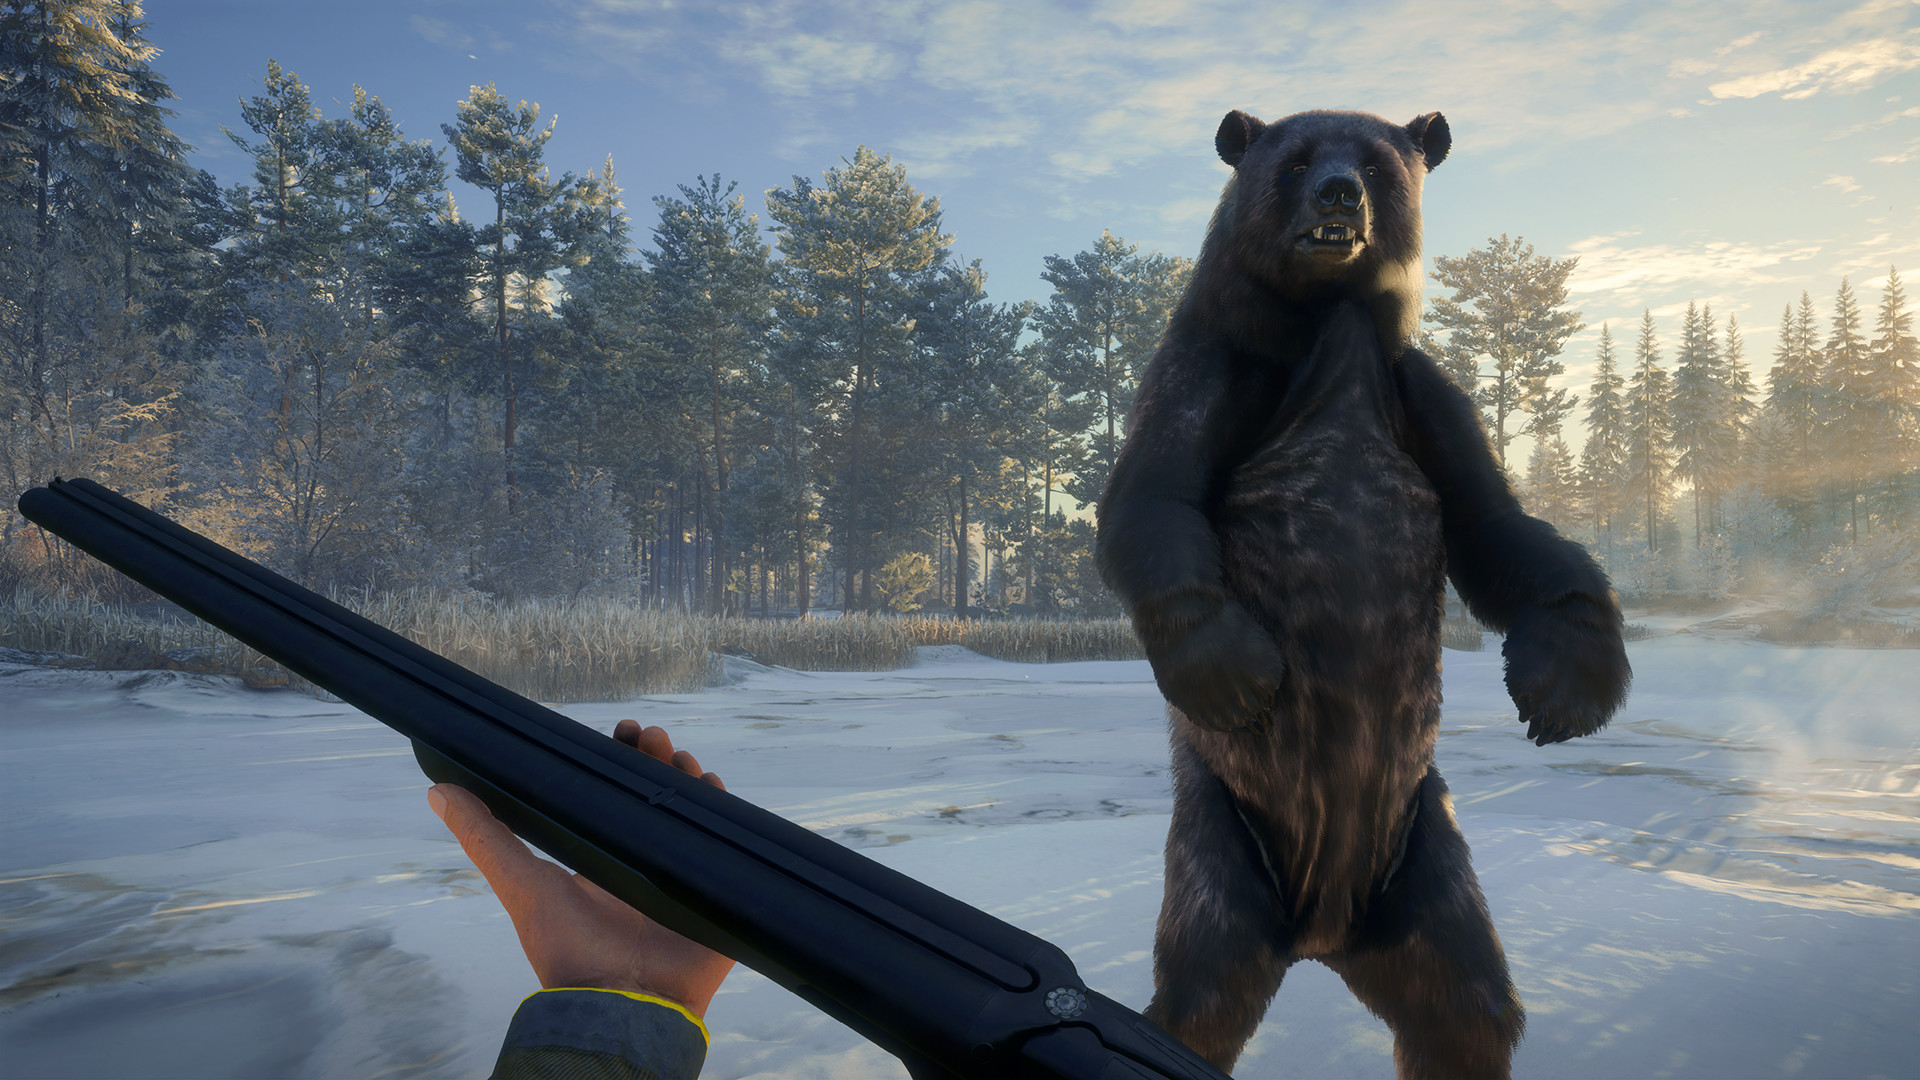 TheHunter: Call Of The Wild - Weapon Pack 2 DLC Steam CD Key